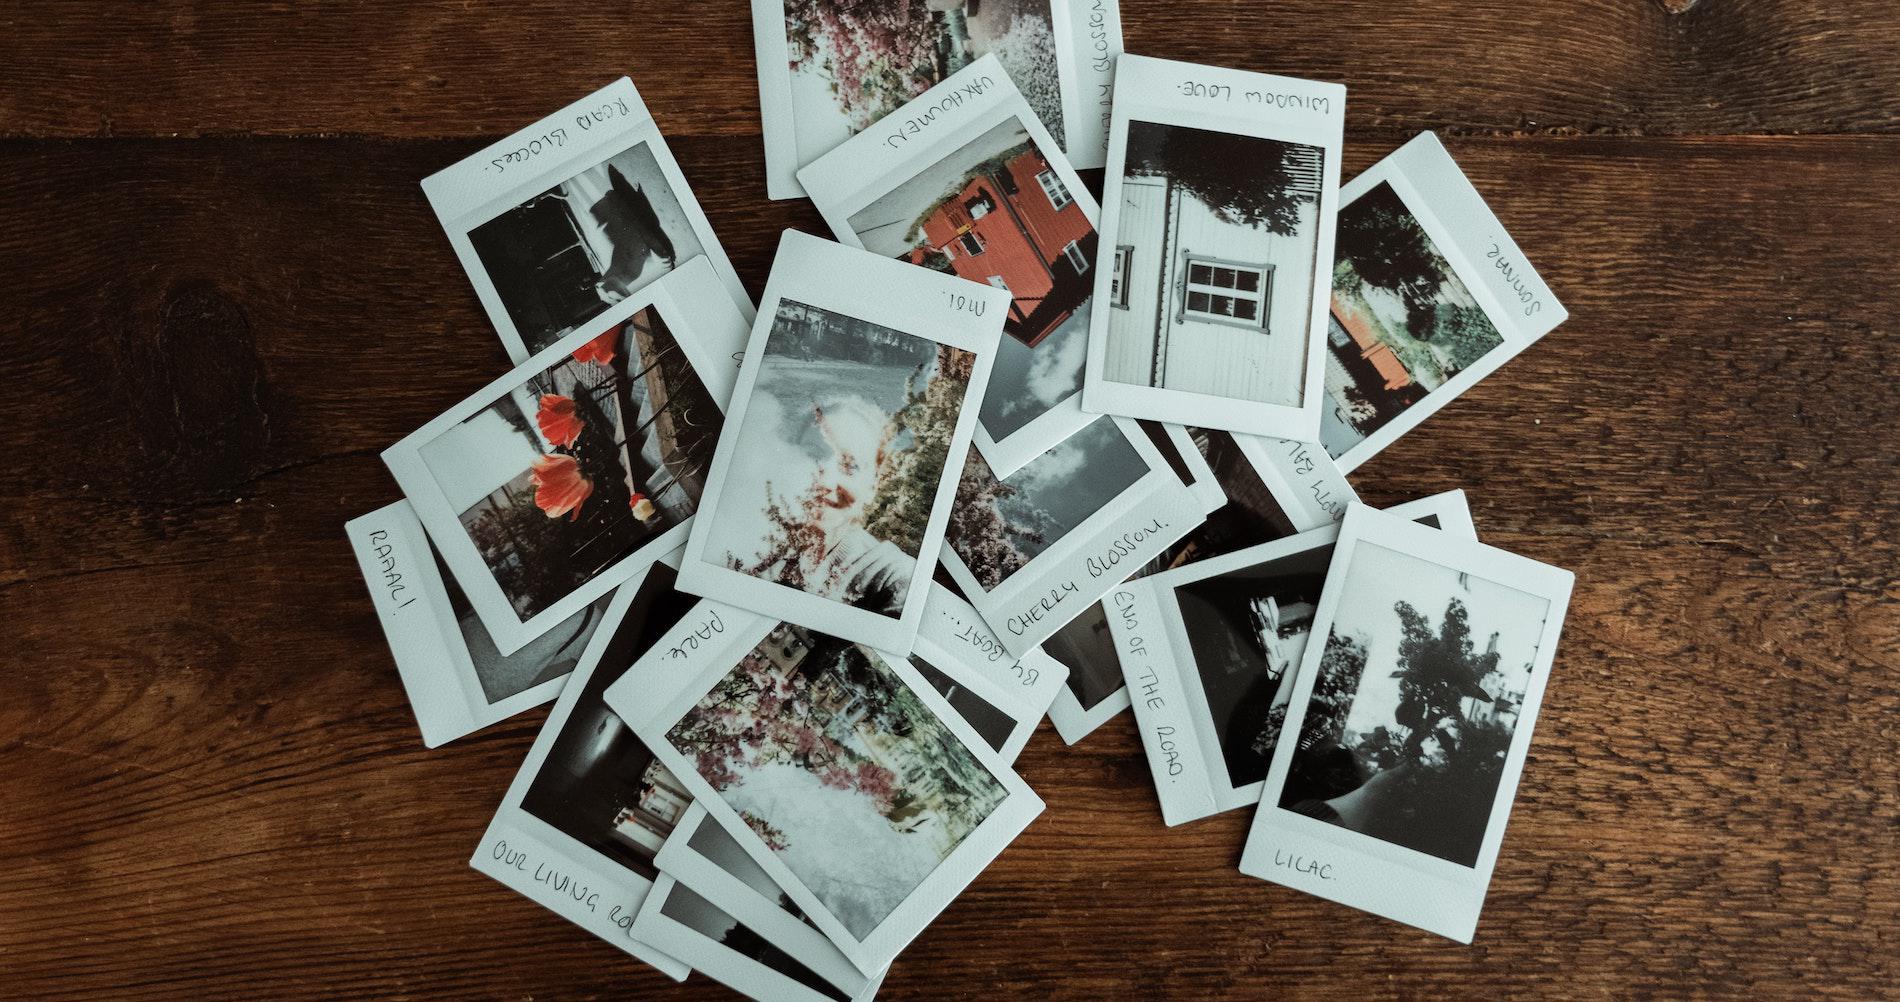 A selection of polaroids on a wooden table